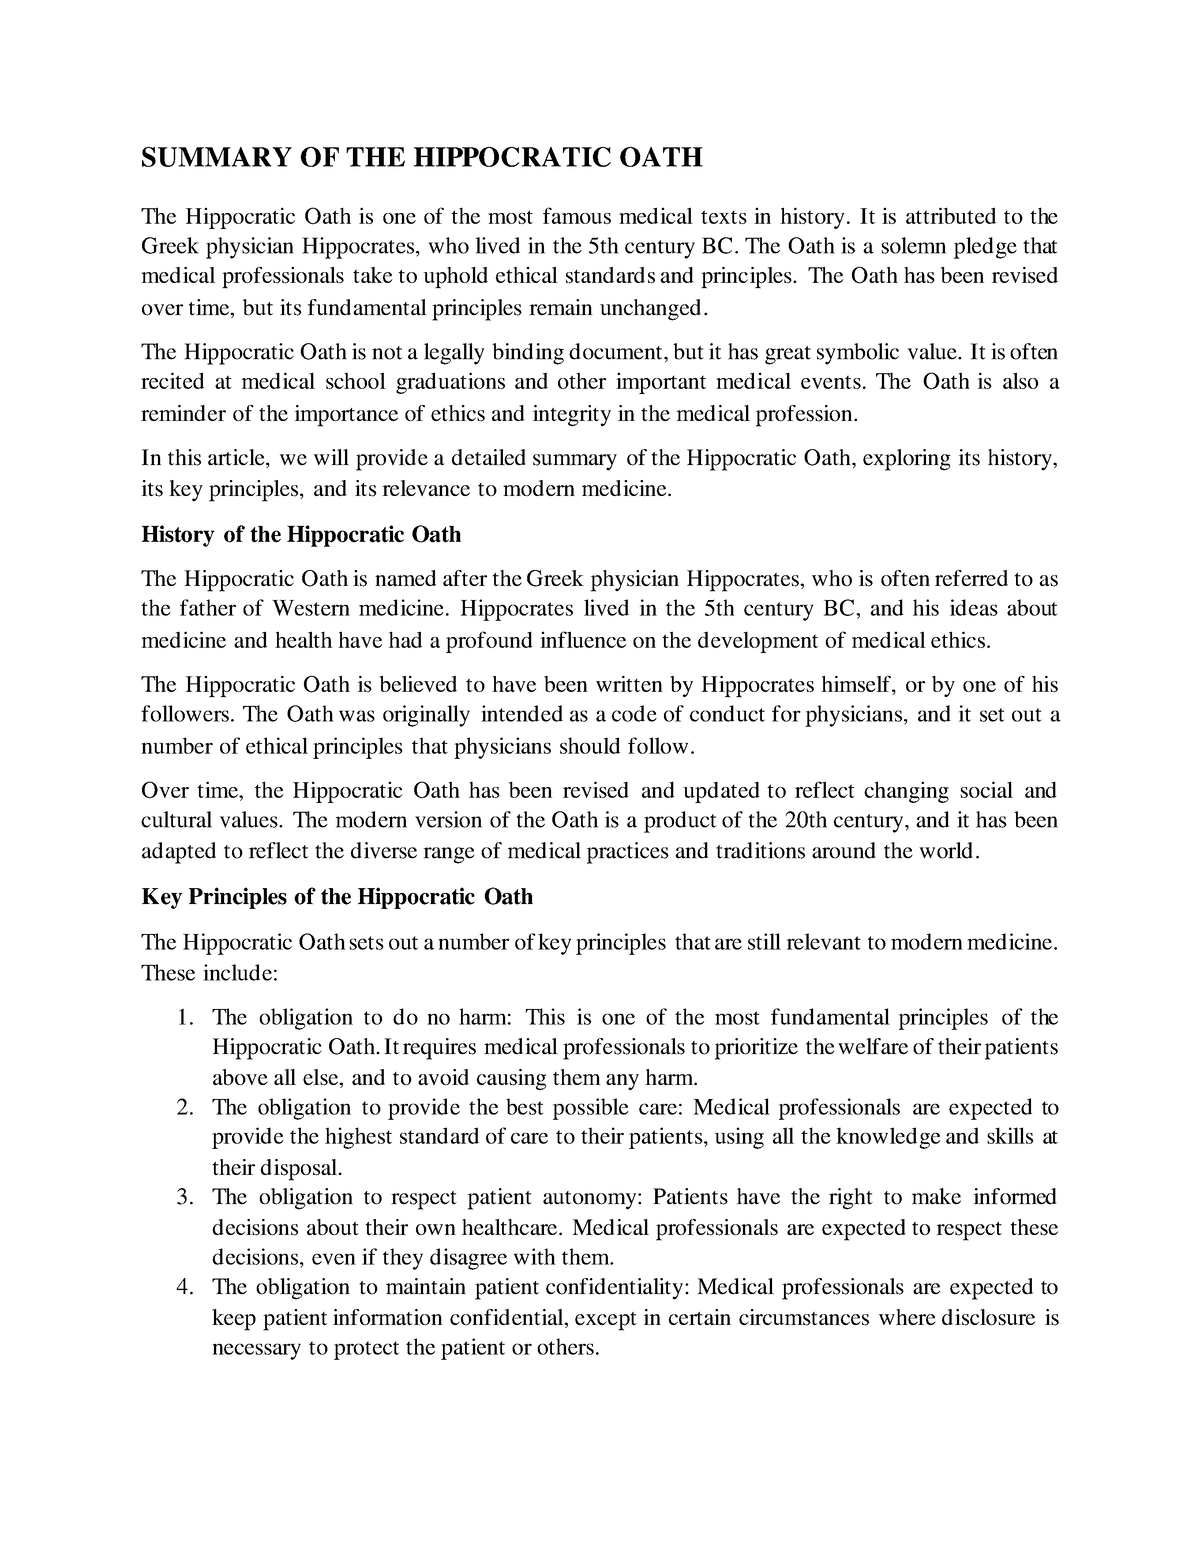 Summary Of The Hippocratic Oath Summary Of The Hippocratic Oath The